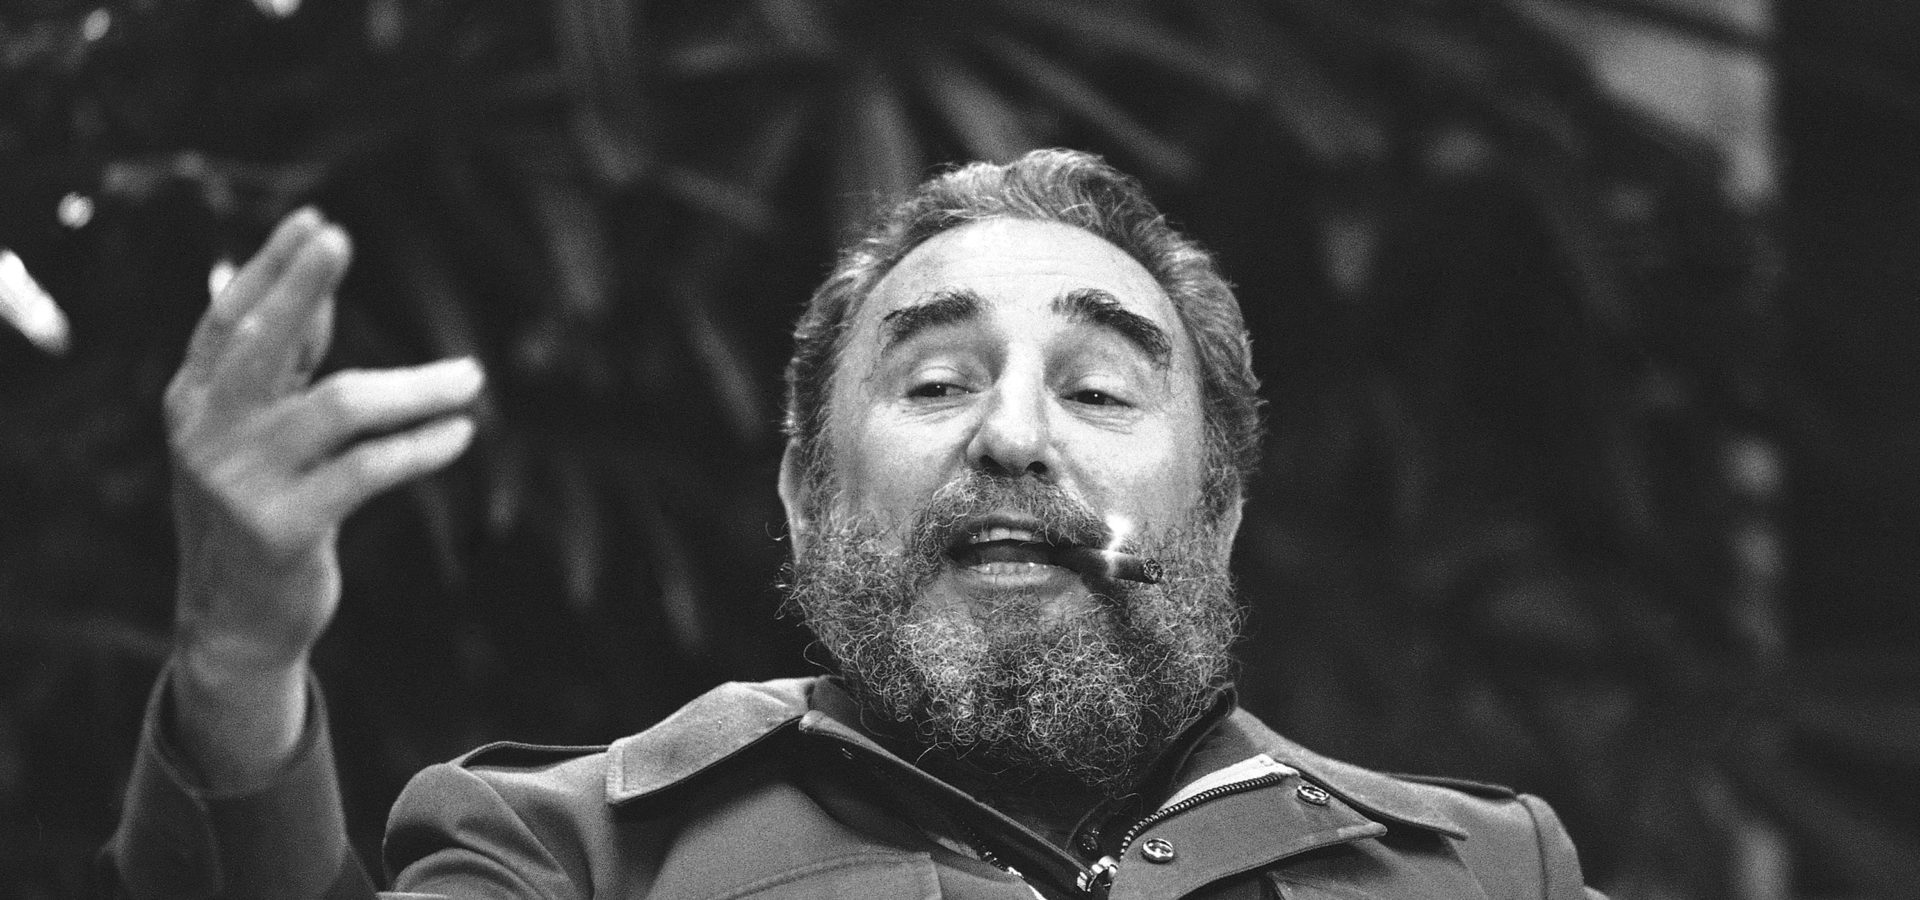 Cuba President Fidel Castro gestures during an interview at the Presidential Palace for PBS’s MacNeil/Lehrer Newshour, Feb. 8, 1985, Havana, Cuba. Castro said closer U.S.-Cuban ties would ease global tensions but “I will not change a single one of my principles for a thousand relations with a thousands countries like the United States.” (AP Photo/Charles Tasnadi)